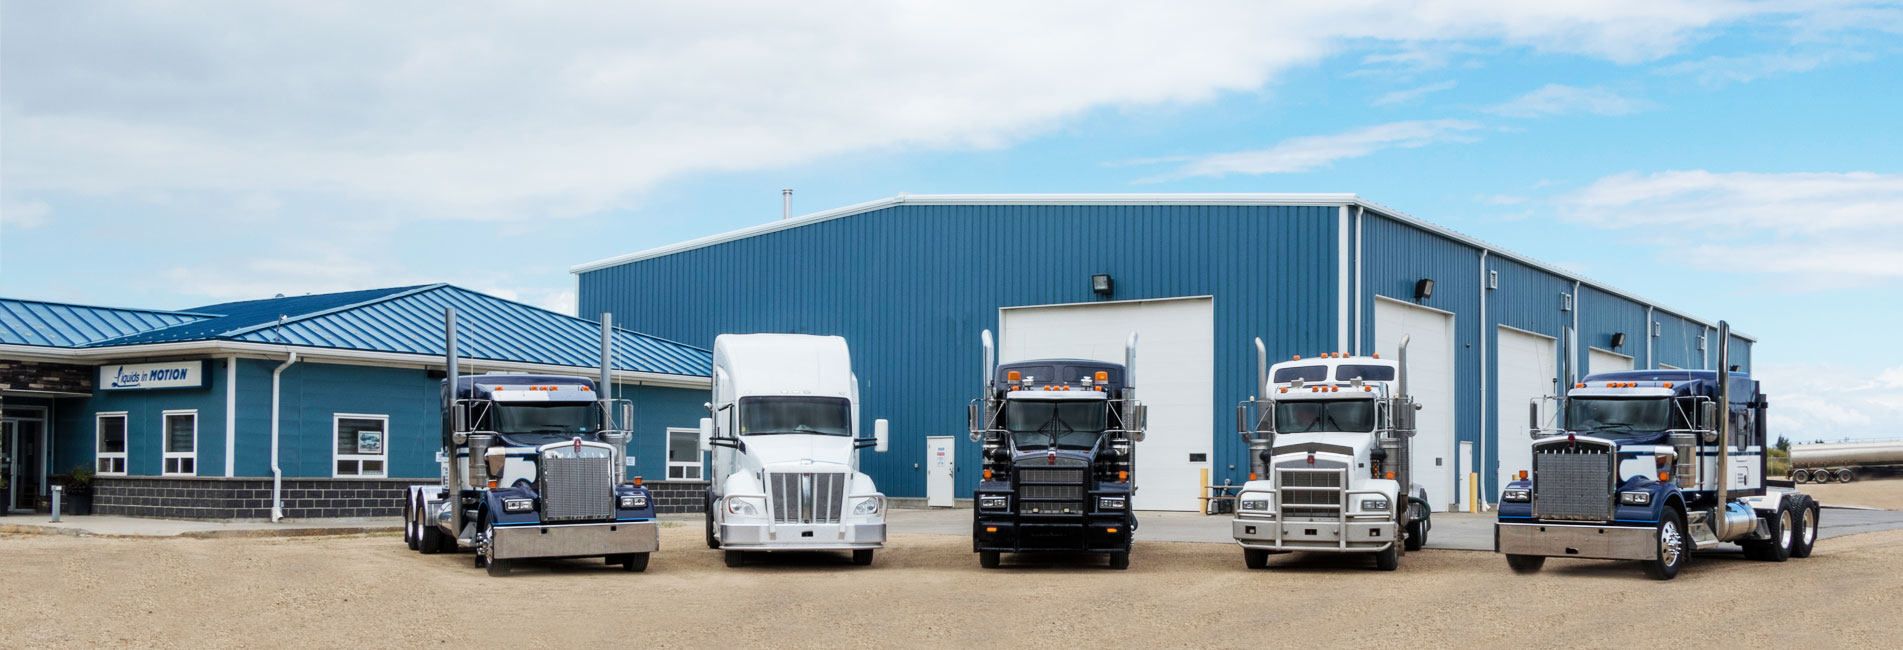 Liquids in Motion Ltd. strives to be the premium transporter of blended chemicals and bulk fluids to customers throughout North America